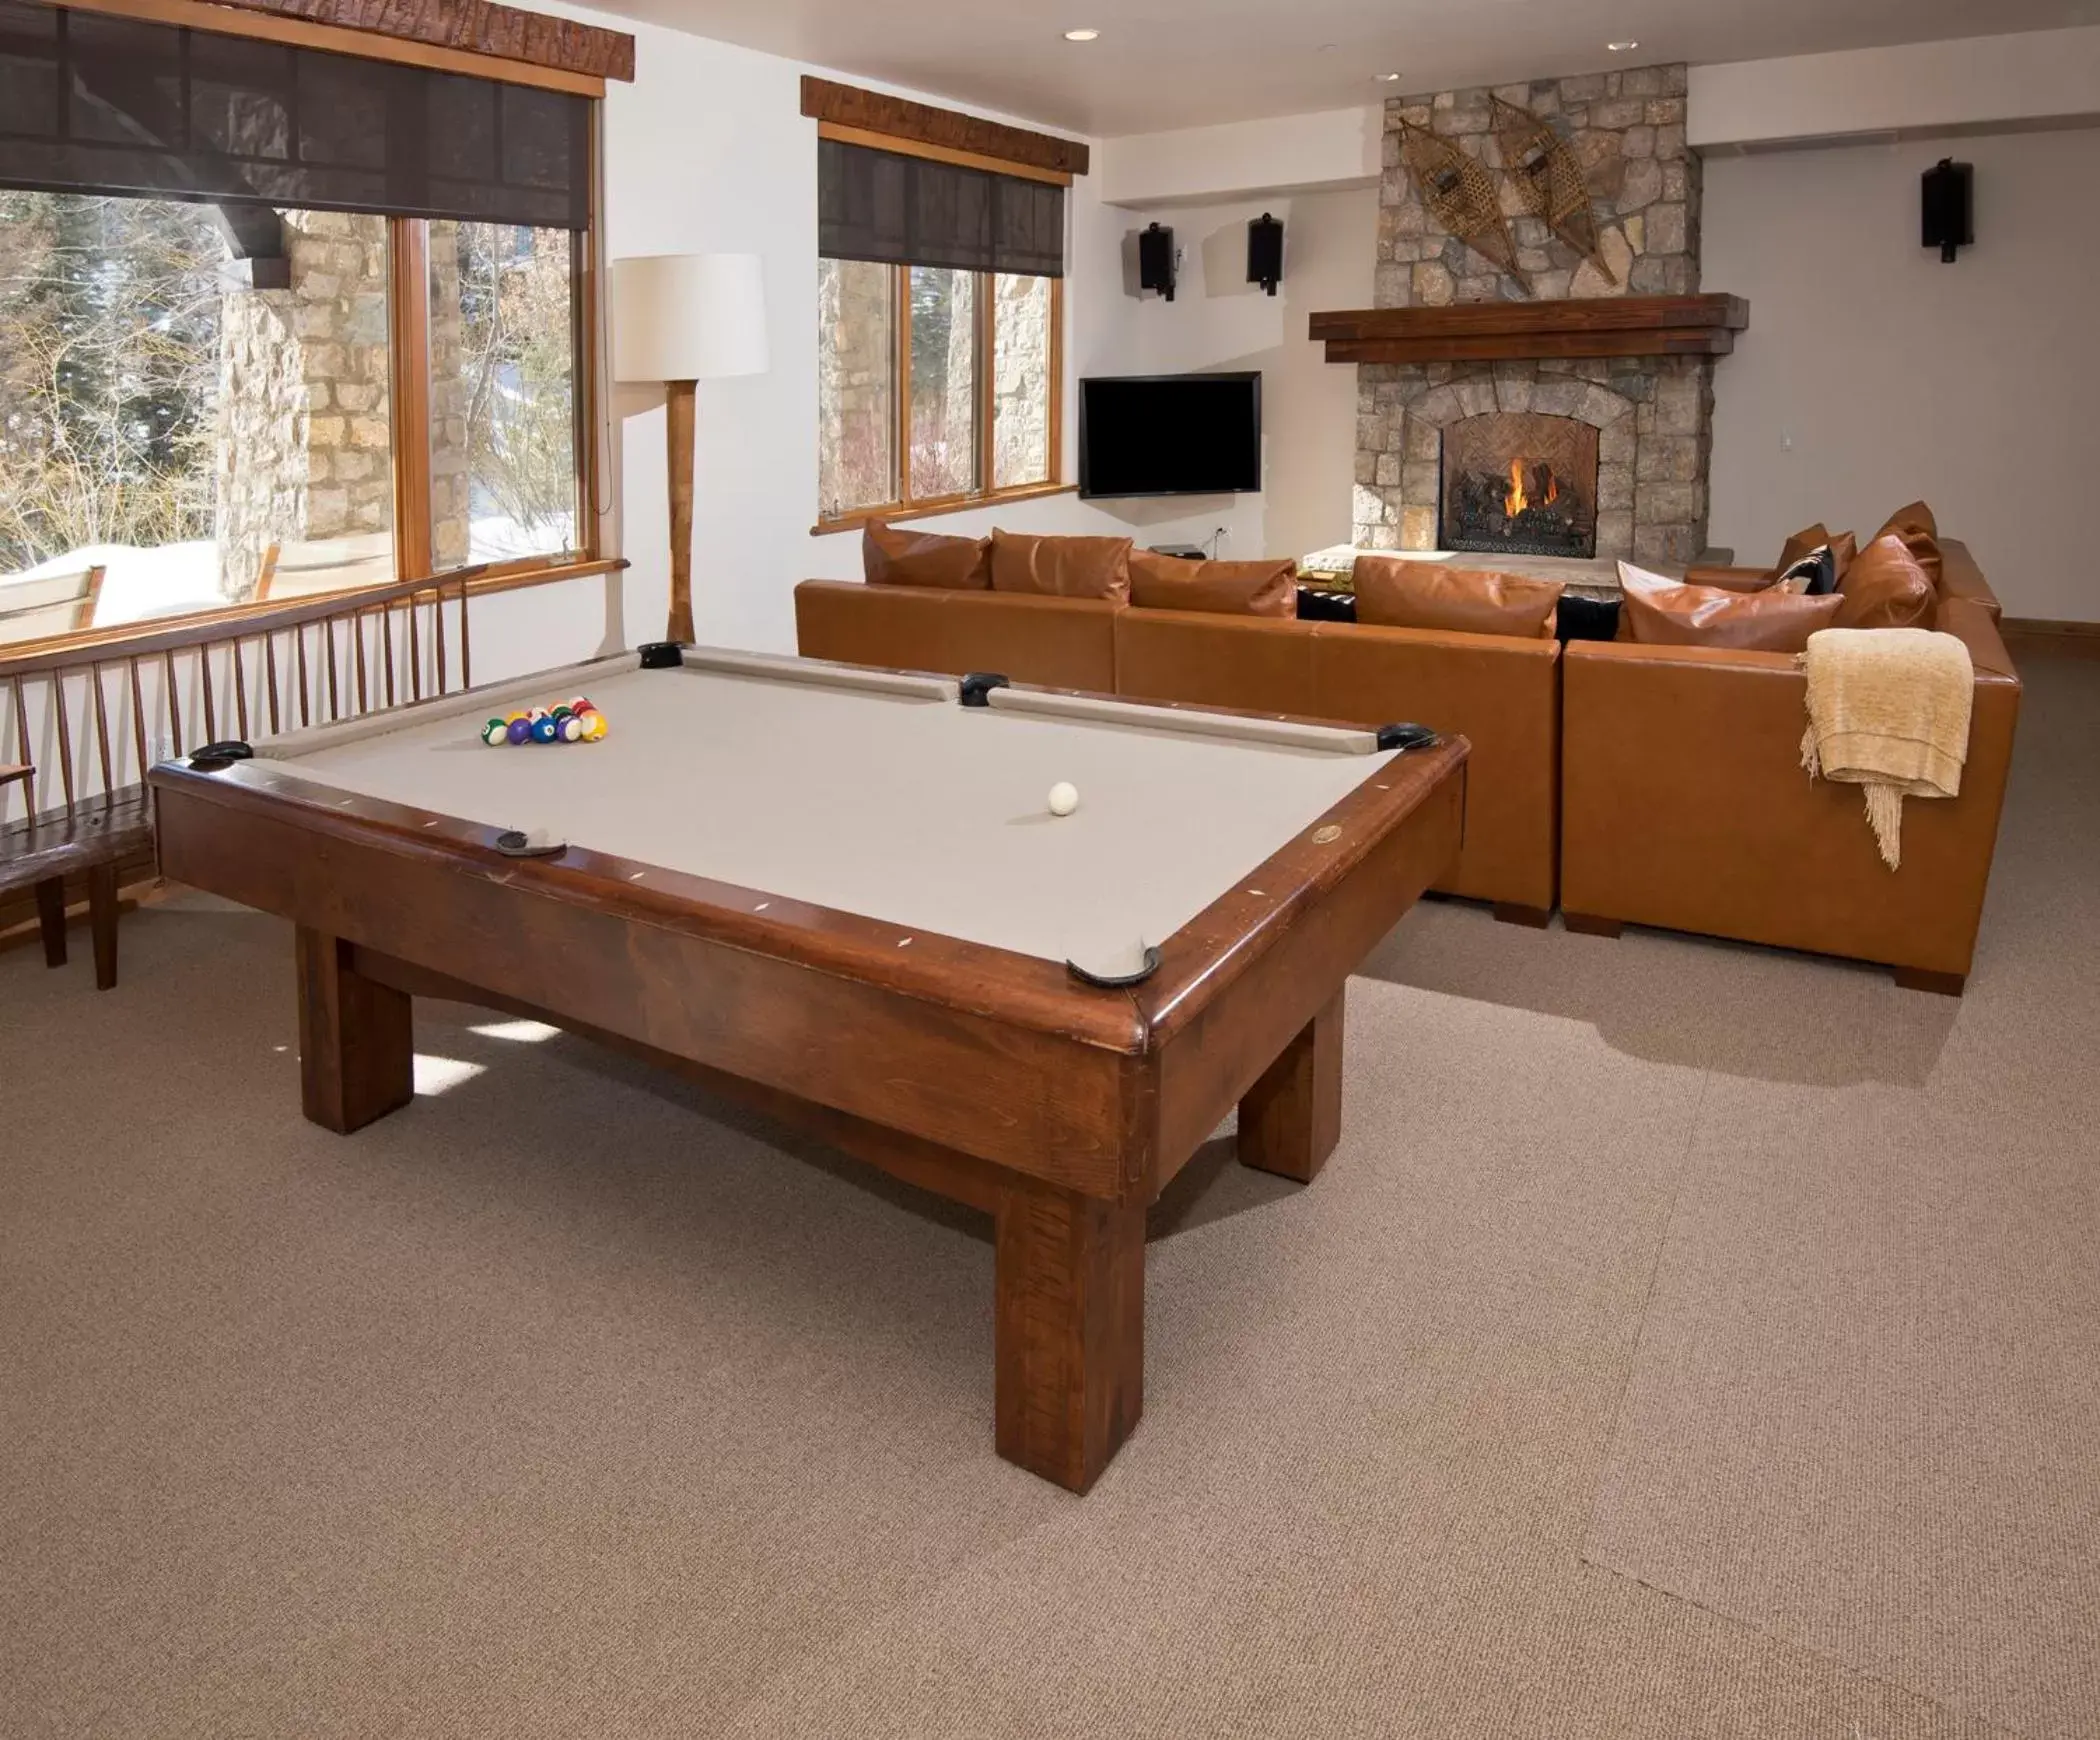 Billiards in The Arrabelle at Vail Square, a RockResort